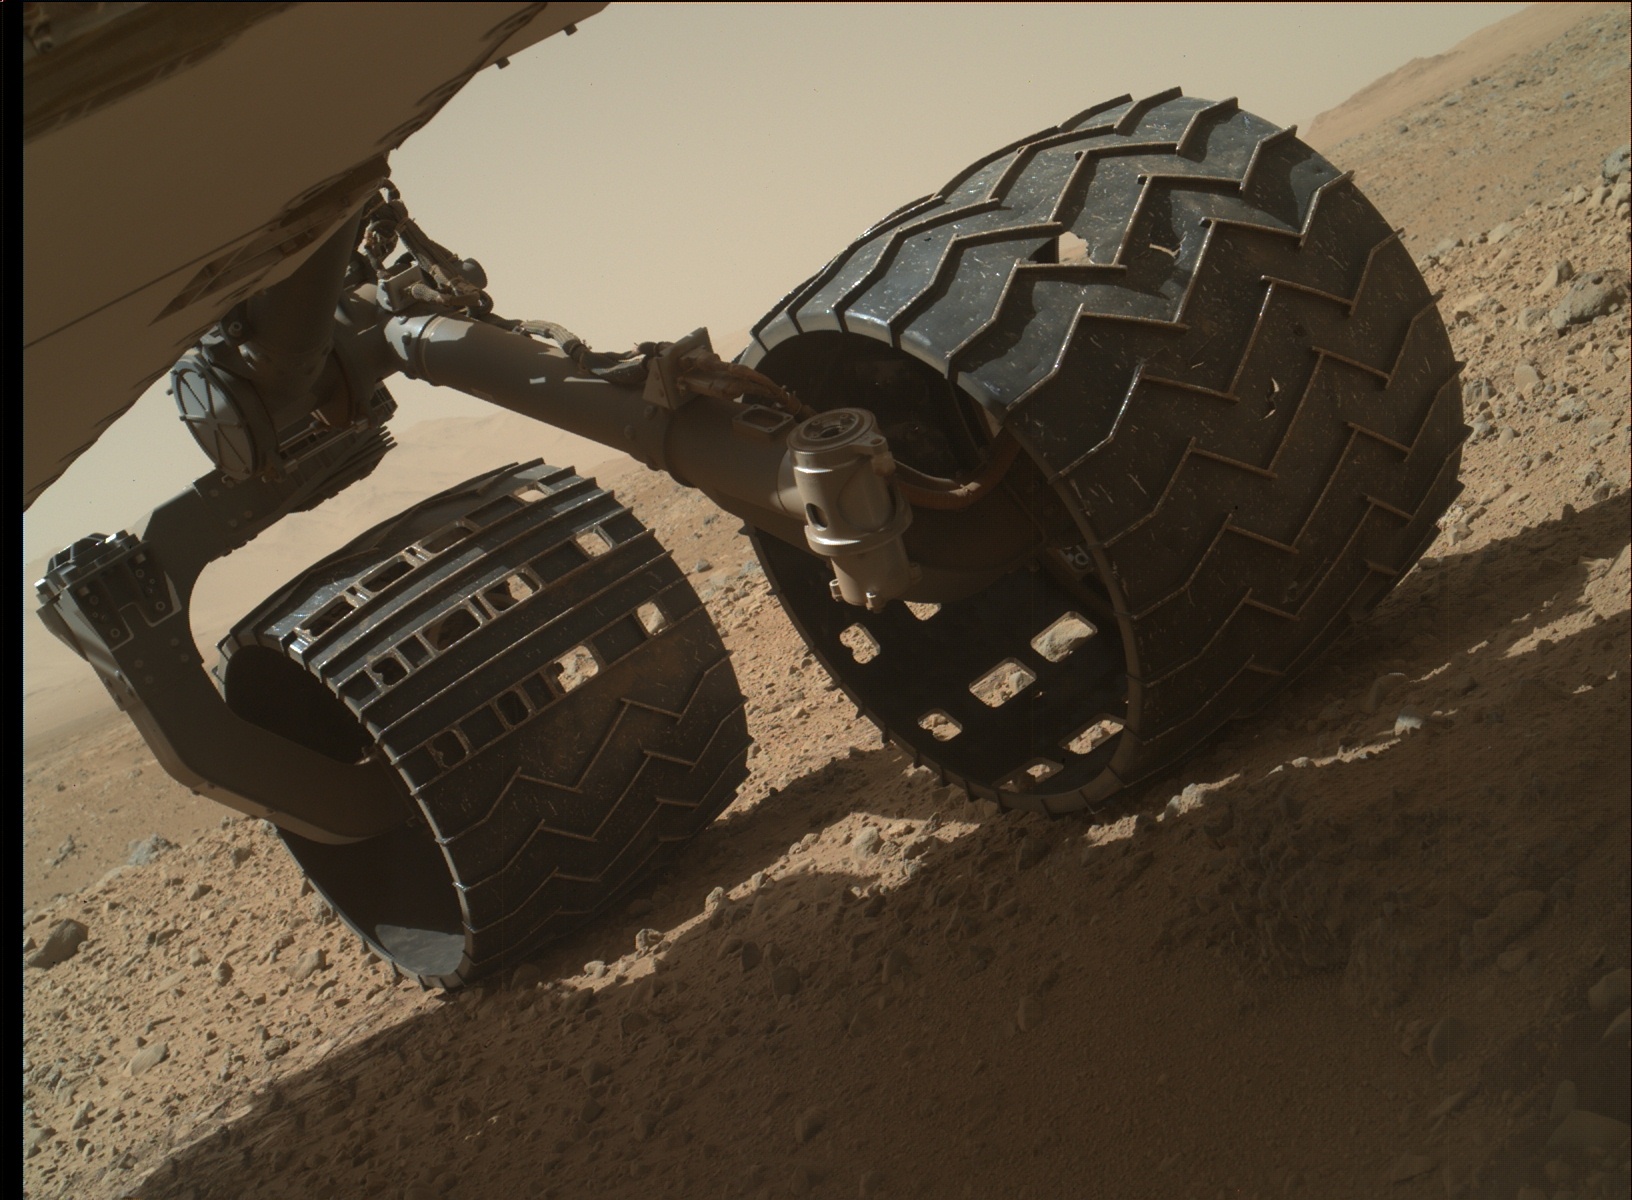 Nasa's Mars rover Curiosity acquired this image using its Mars Hand Lens Imager (MAHLI) on Sol 527